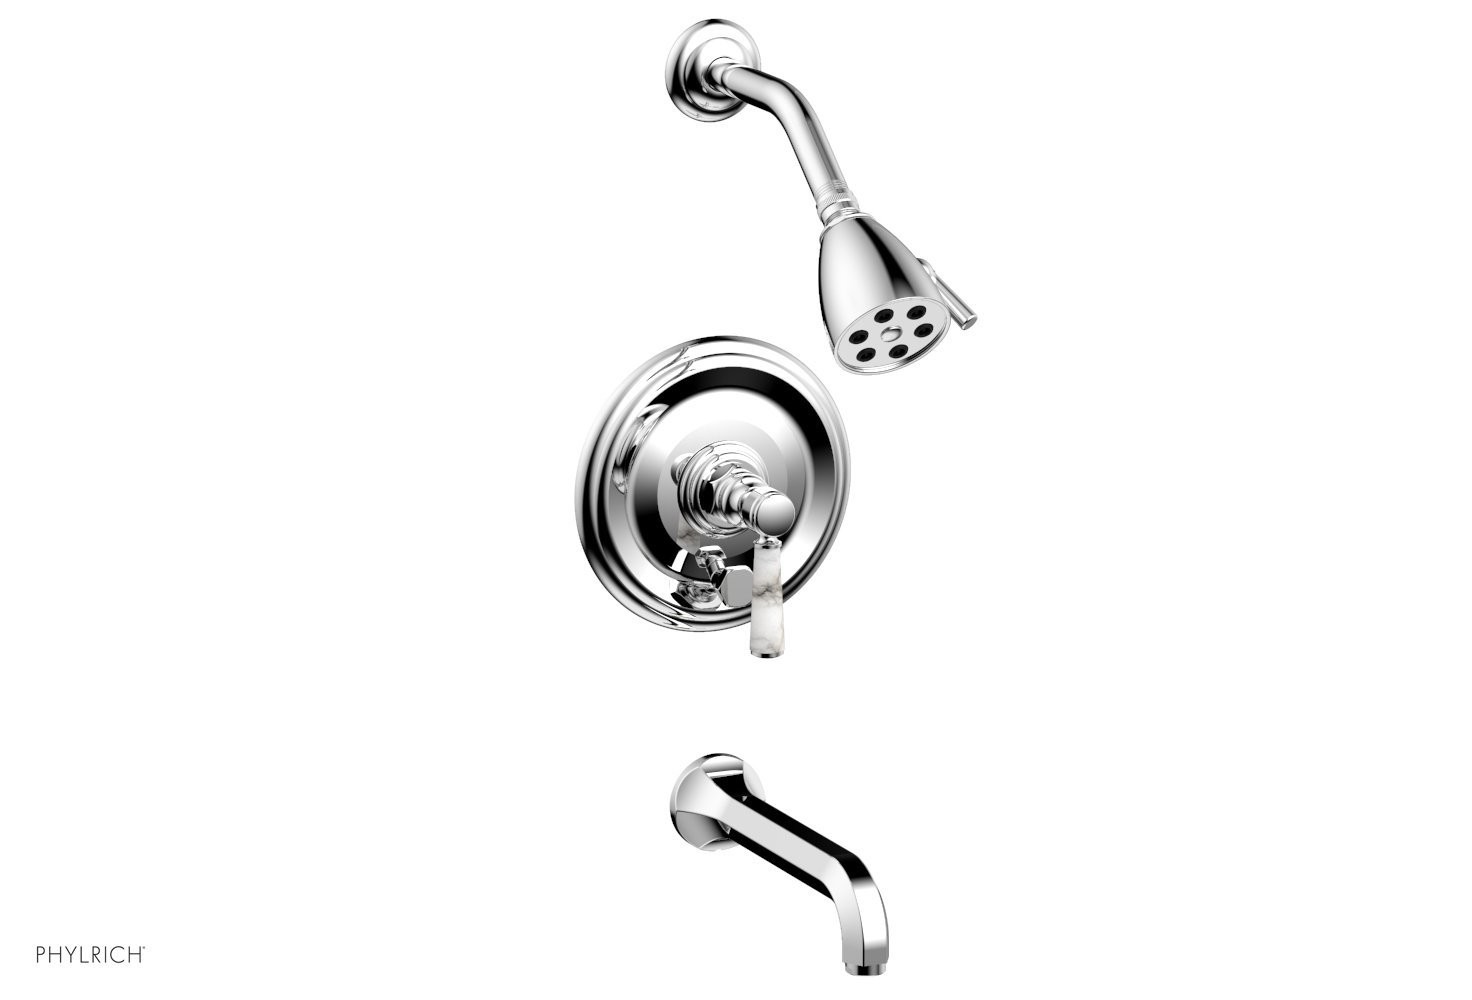 PHYLRICH 500-28-031 HEX TRADITIONAL WALL MOUNT PRESSURE BALANCE TUB AND SHOWER SET WITH WHITE MARBLE LEVER HANDLE